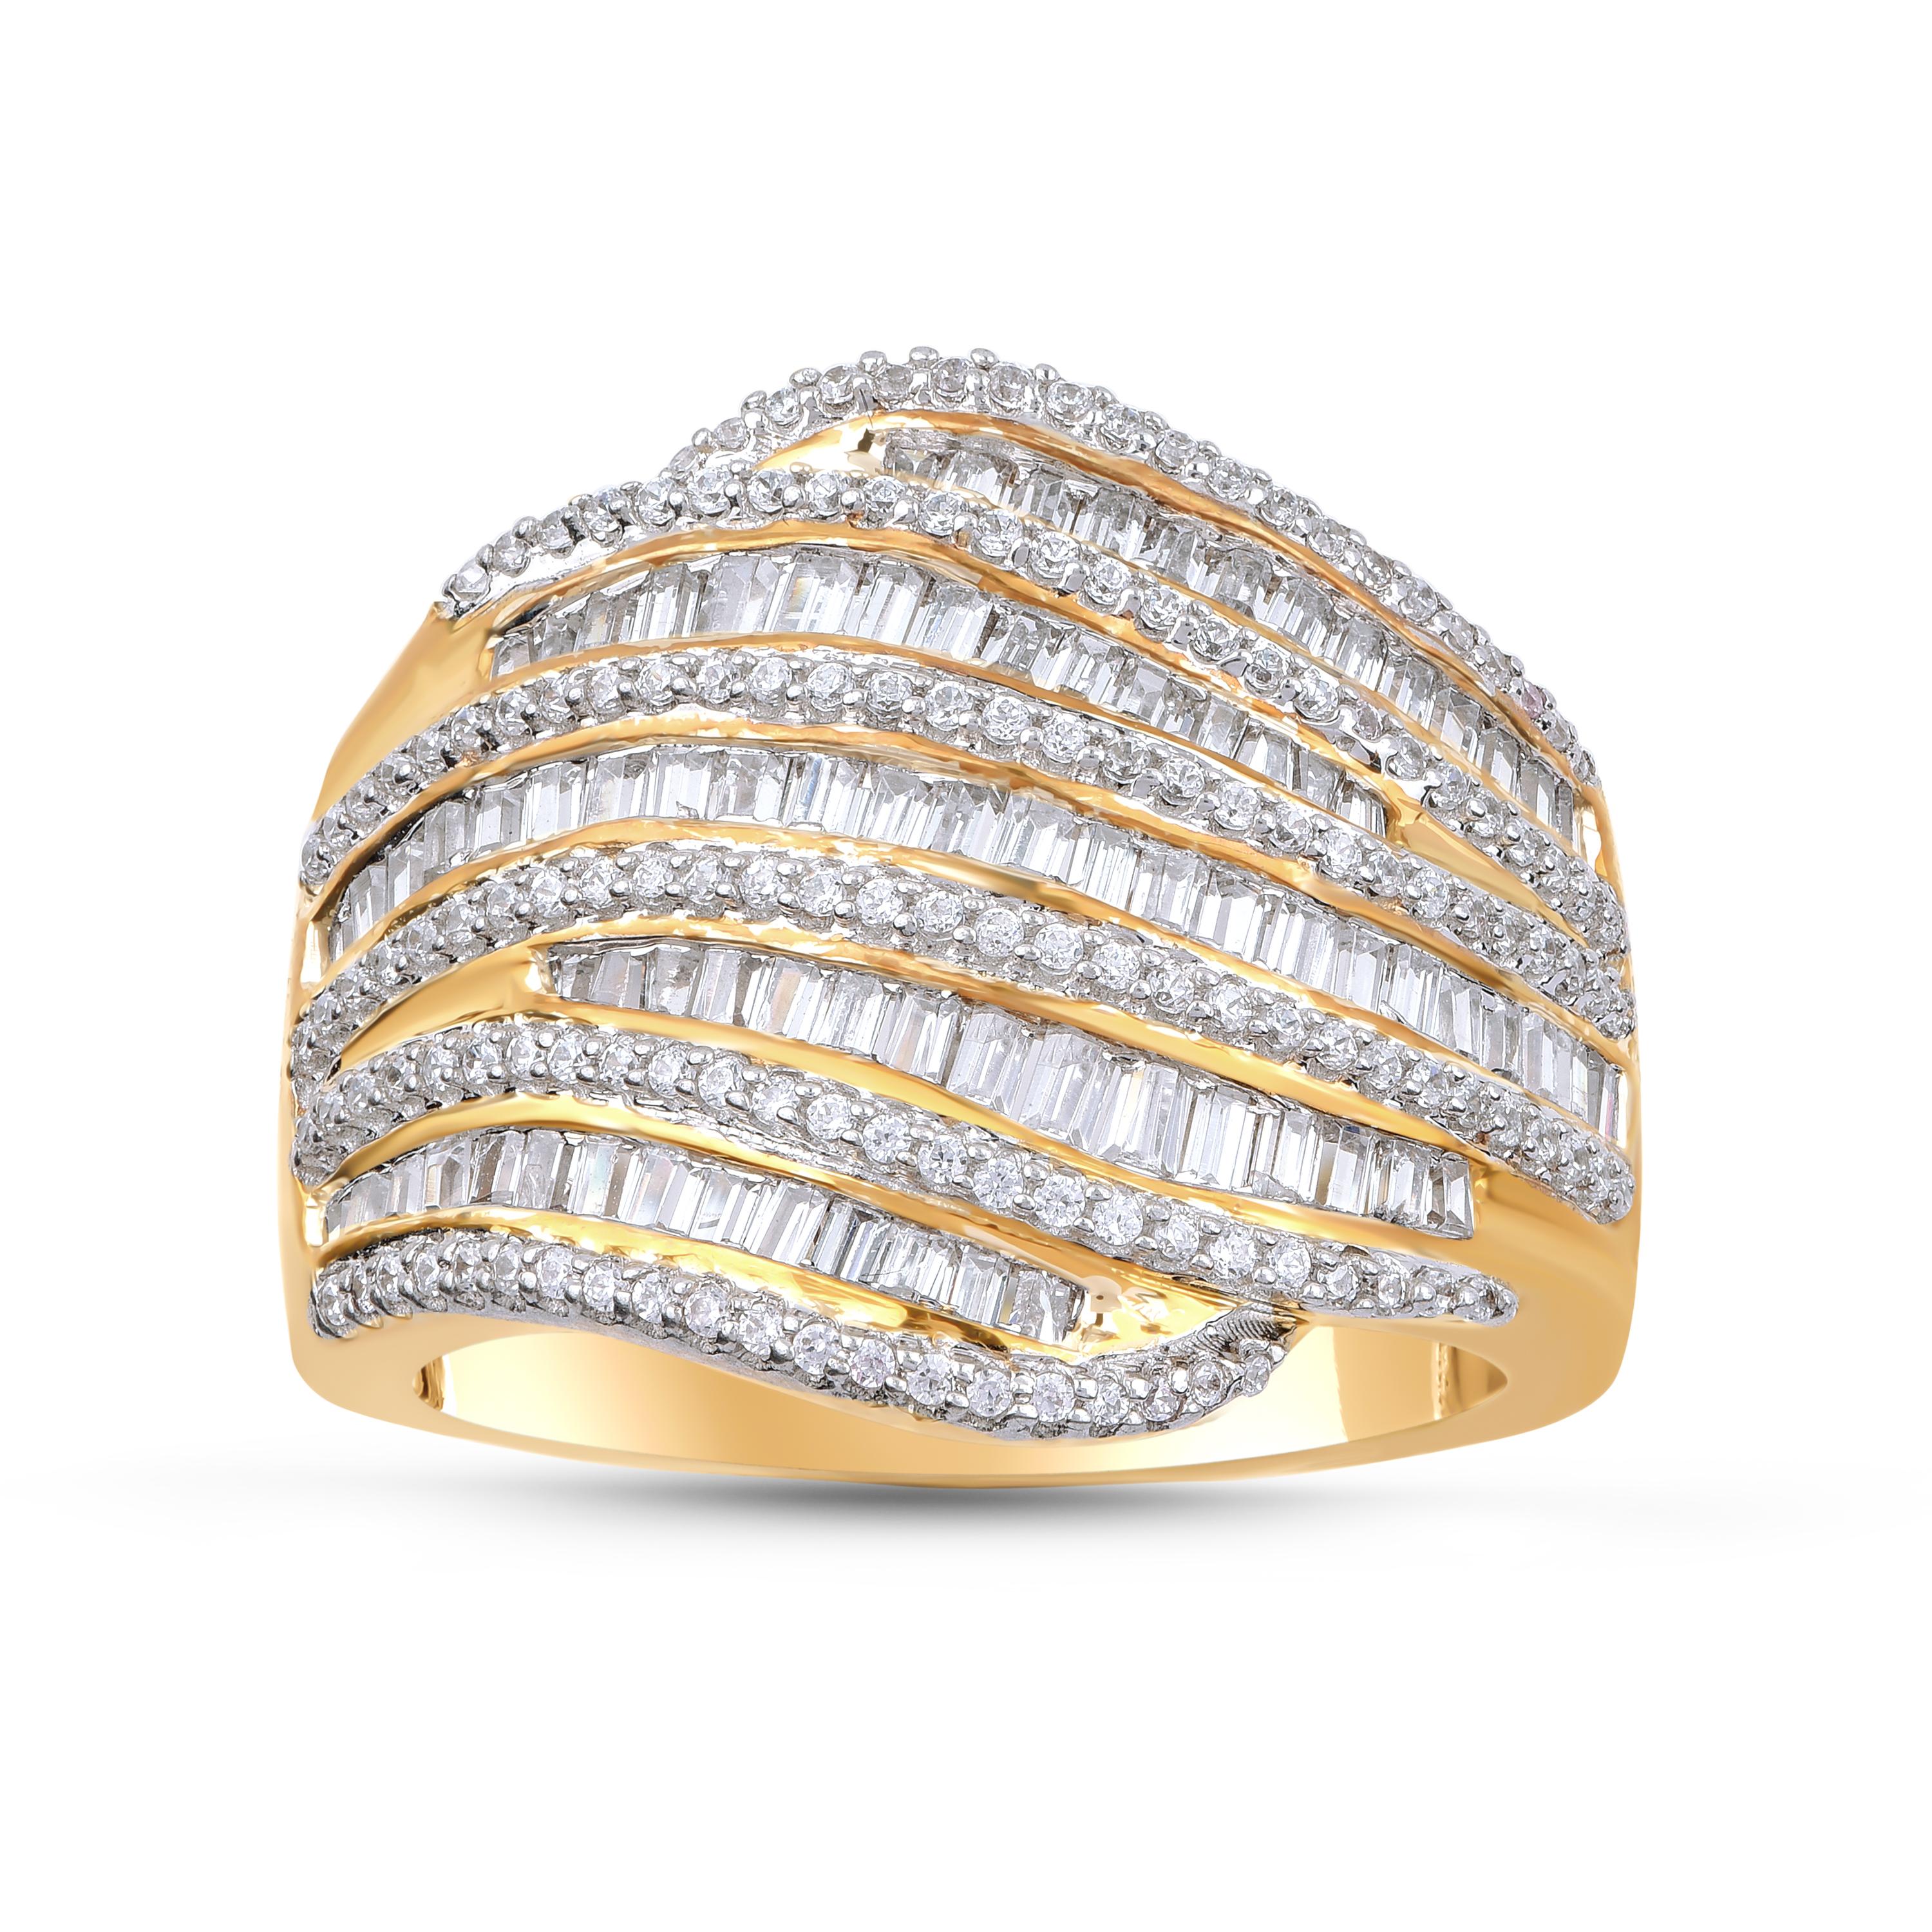 Featuring 150 brilliant and 97 baguette natural diamonds set in prong and channel setting and crafted beautifully in 18 KT Yellow Gold. Diamonds are graded H-I Color, I2 Clarity.  

Metal color and ring size can be customized on request. 

This